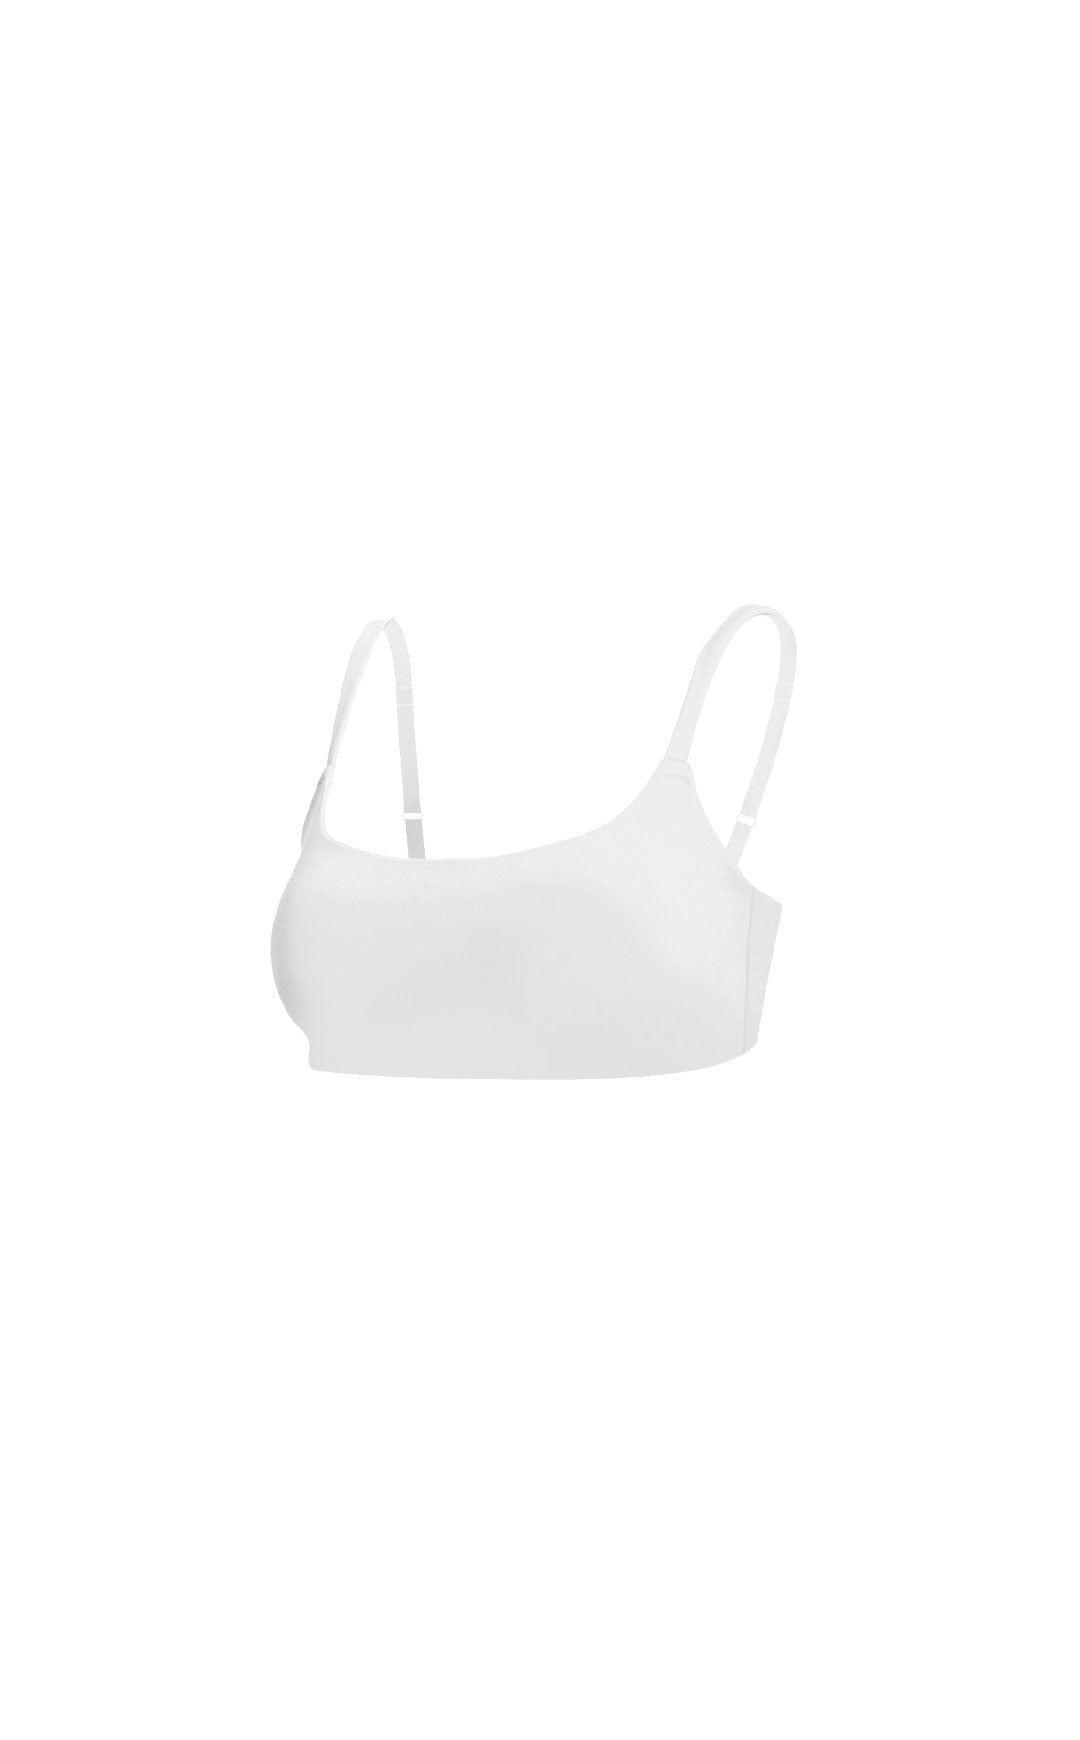 Ladies Bras Marks & Spencer Sale! - Poland, New - The wholesale